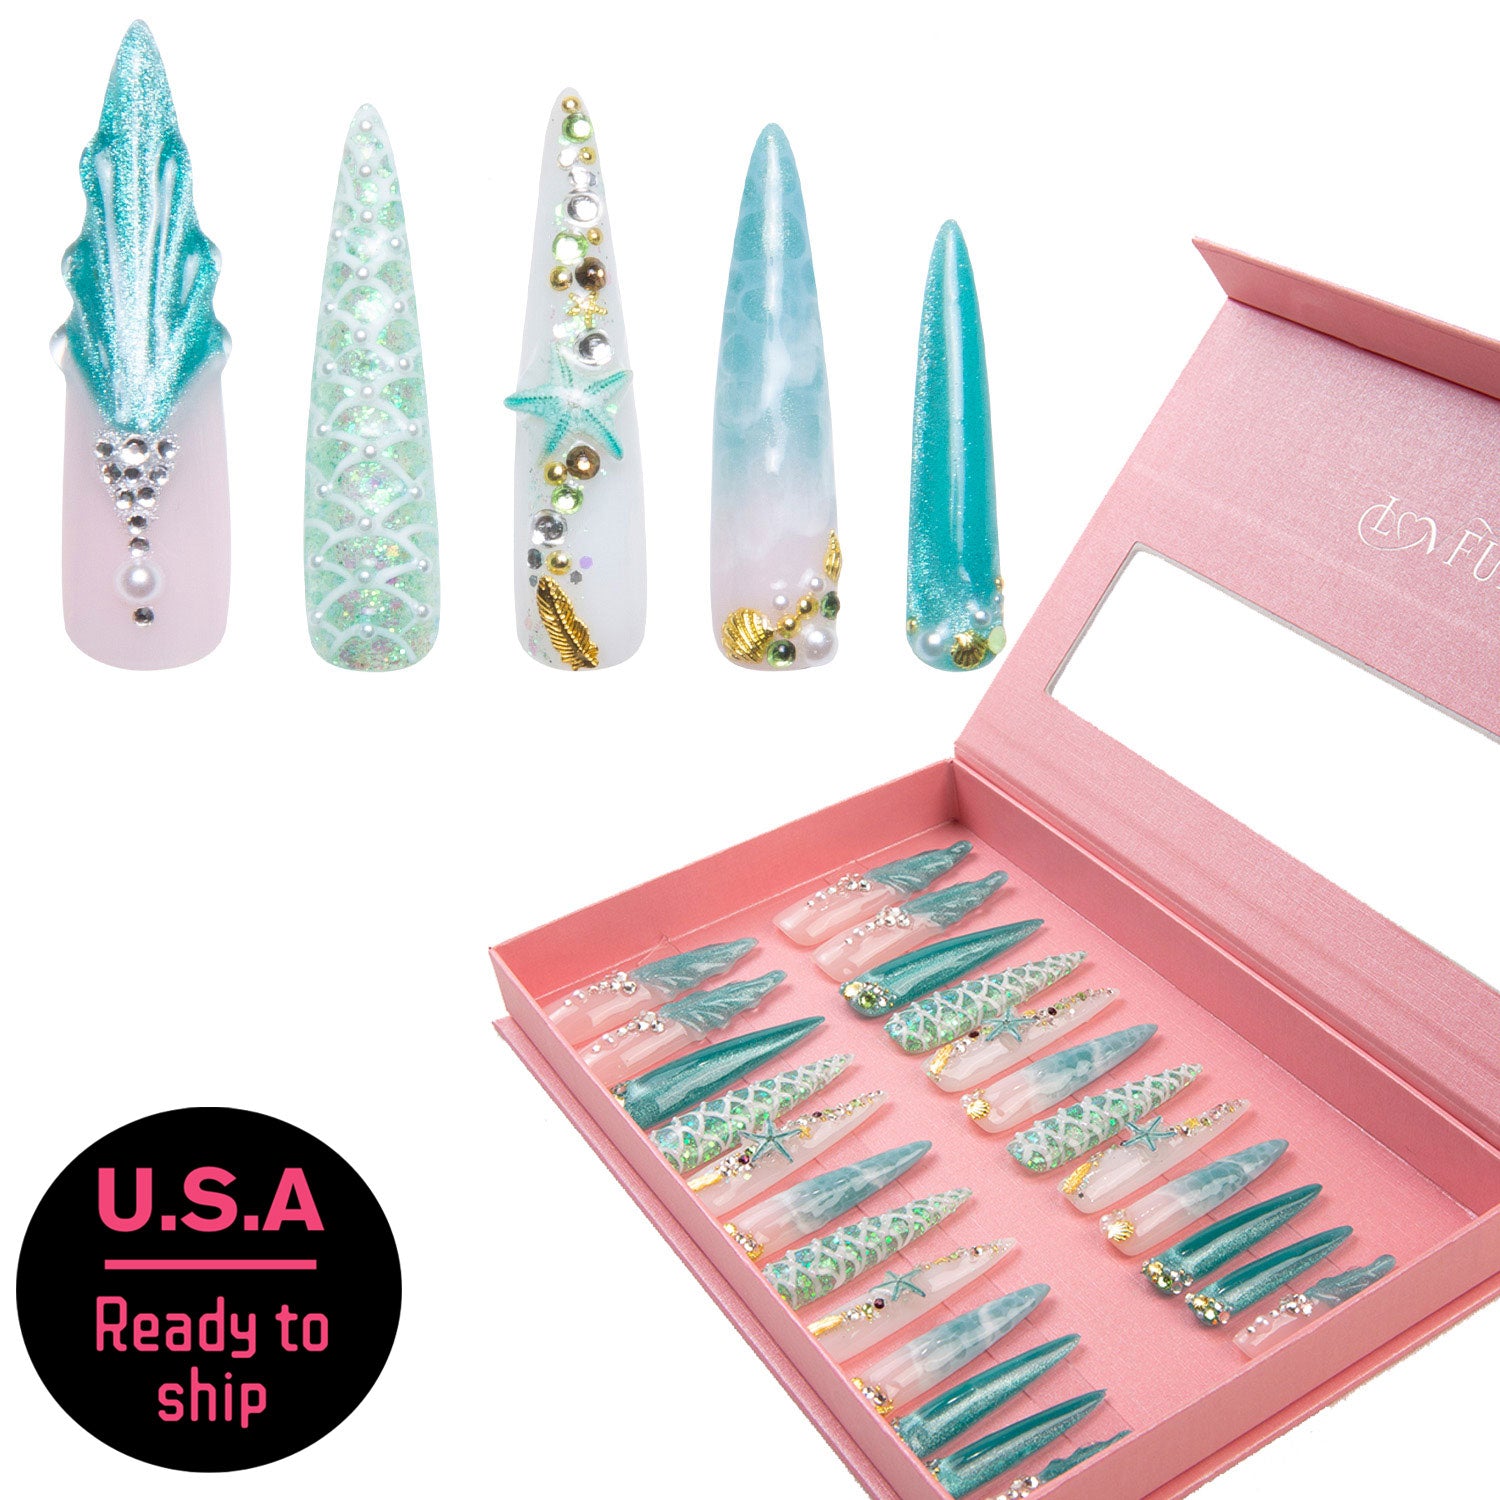 Surfing Girls (H119) 24 pcs press-on nails with Hawaii sea blue base, decorated with starfish, glitter, and rhinestones, shown in an open pink box. Ready to ship from the U.S.A.